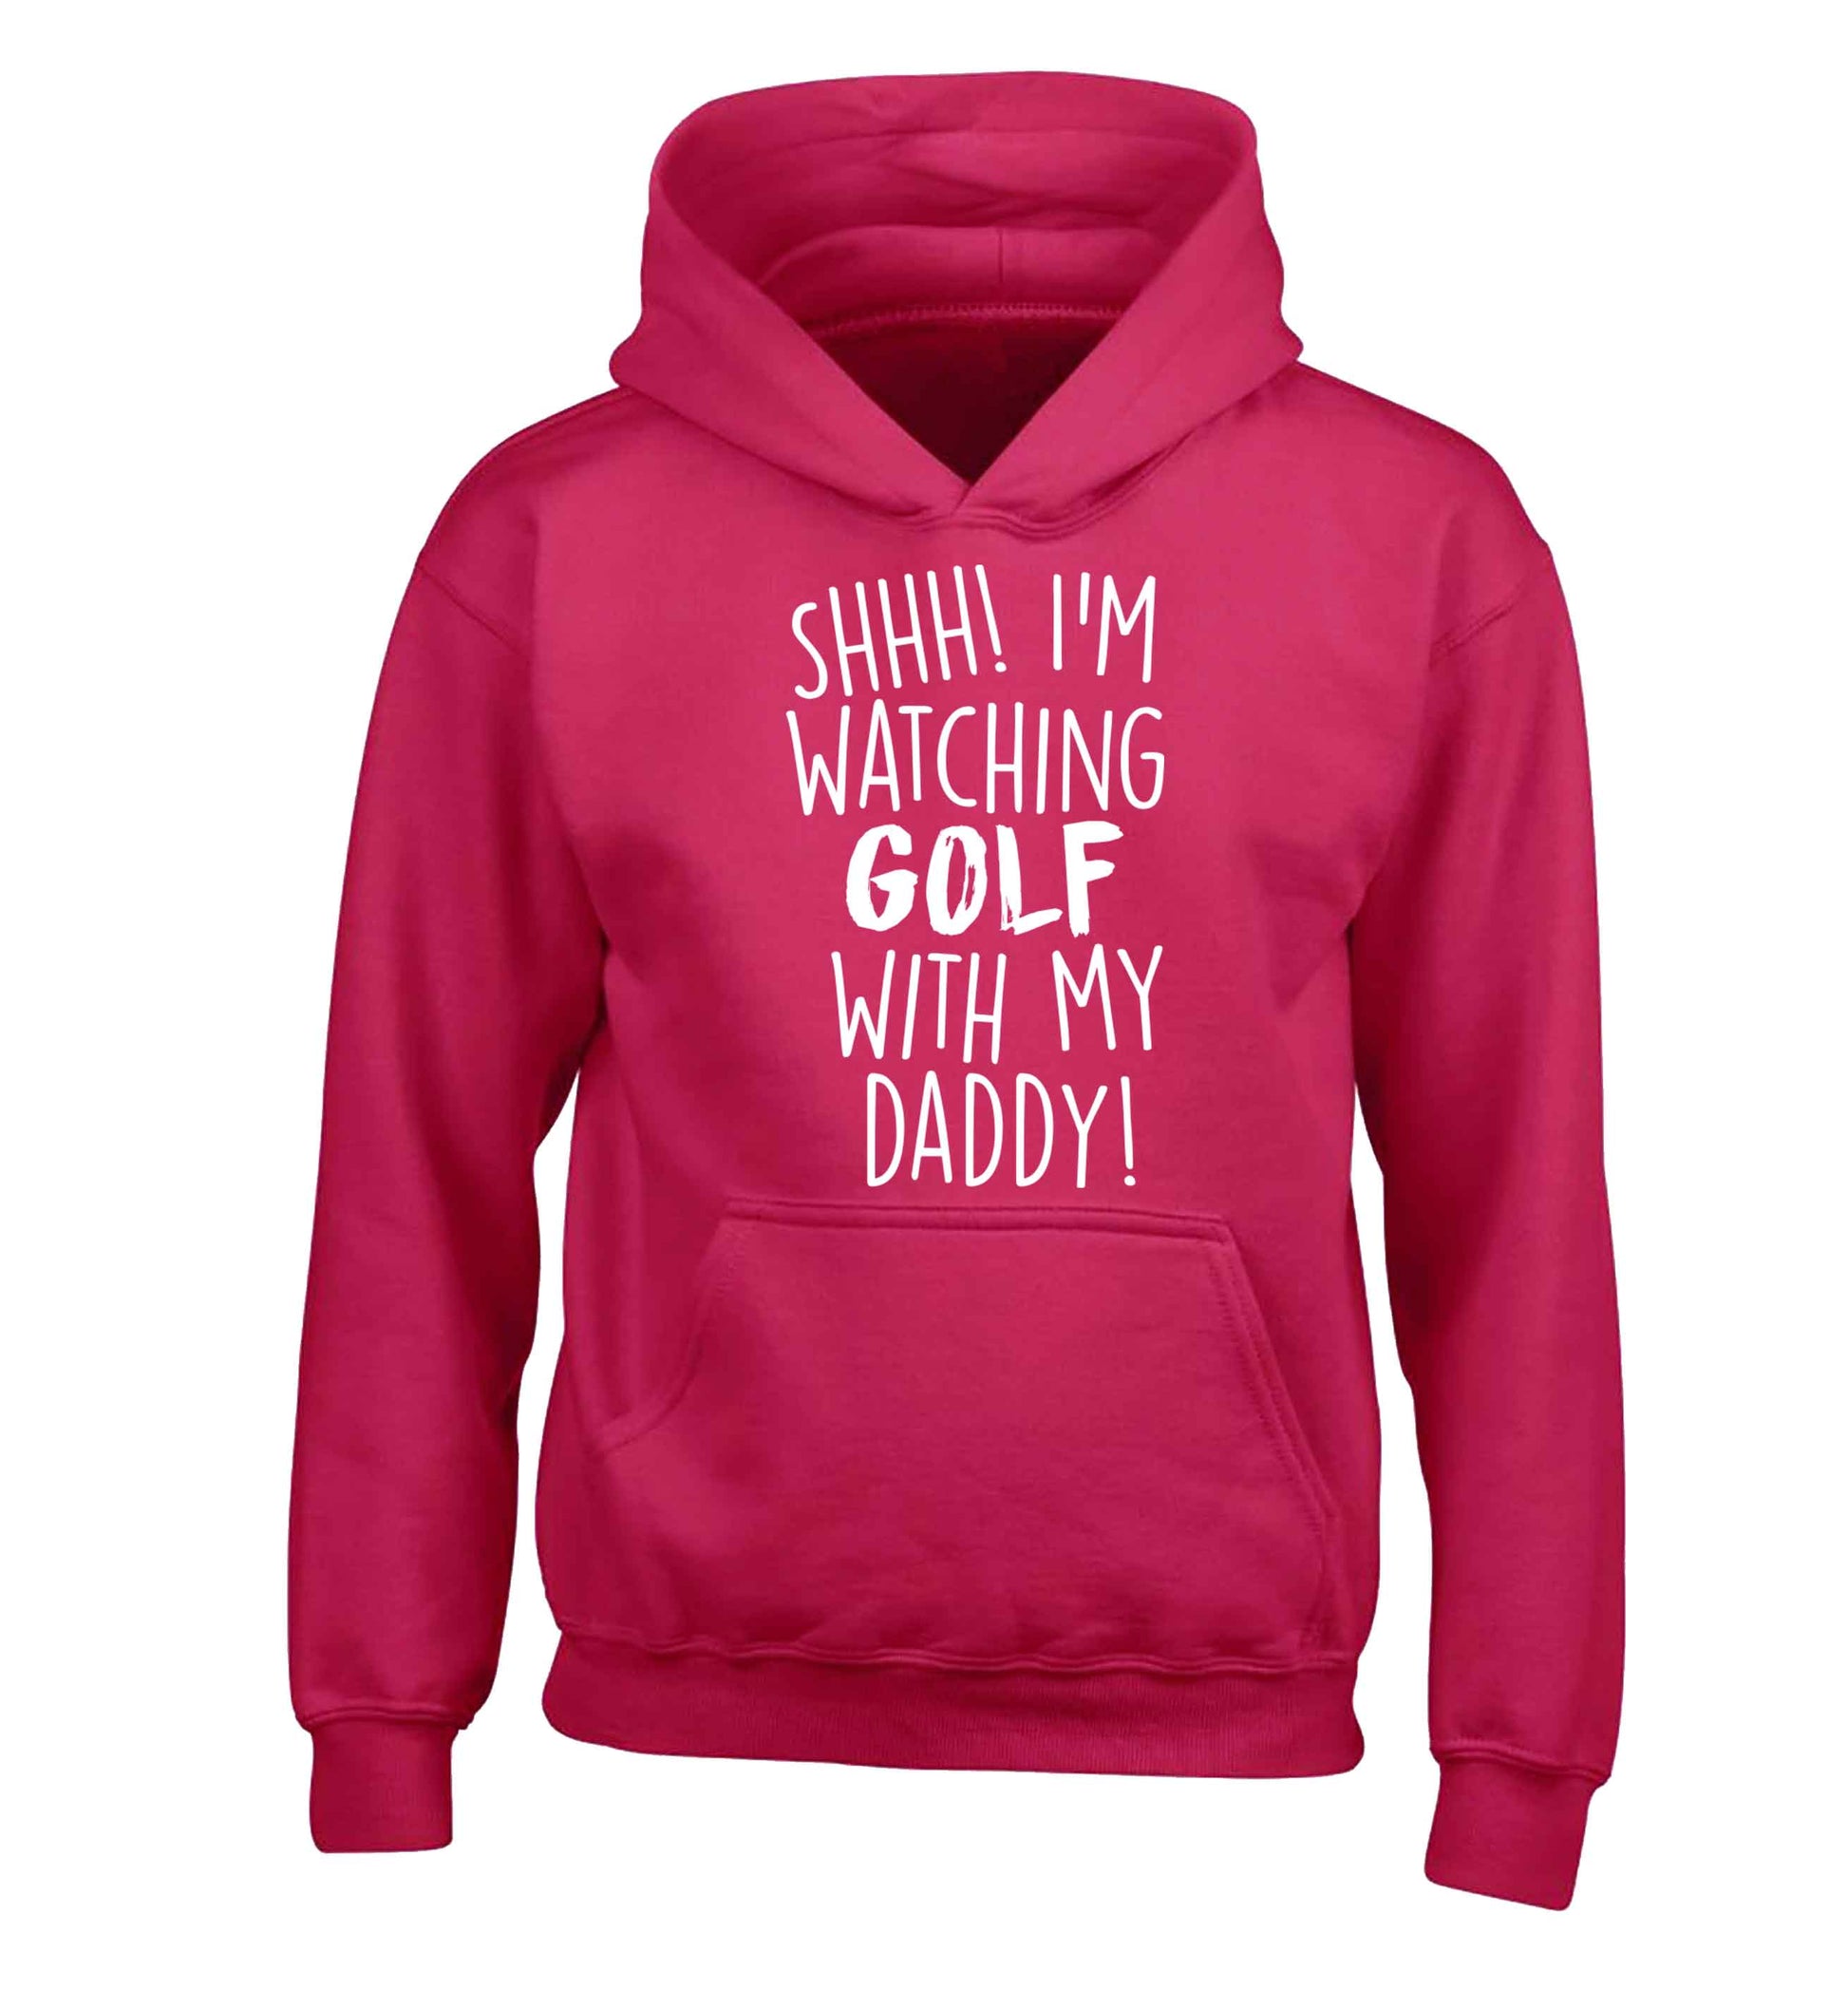 Shh I'm watching golf with my daddy children's pink hoodie 12-13 Years